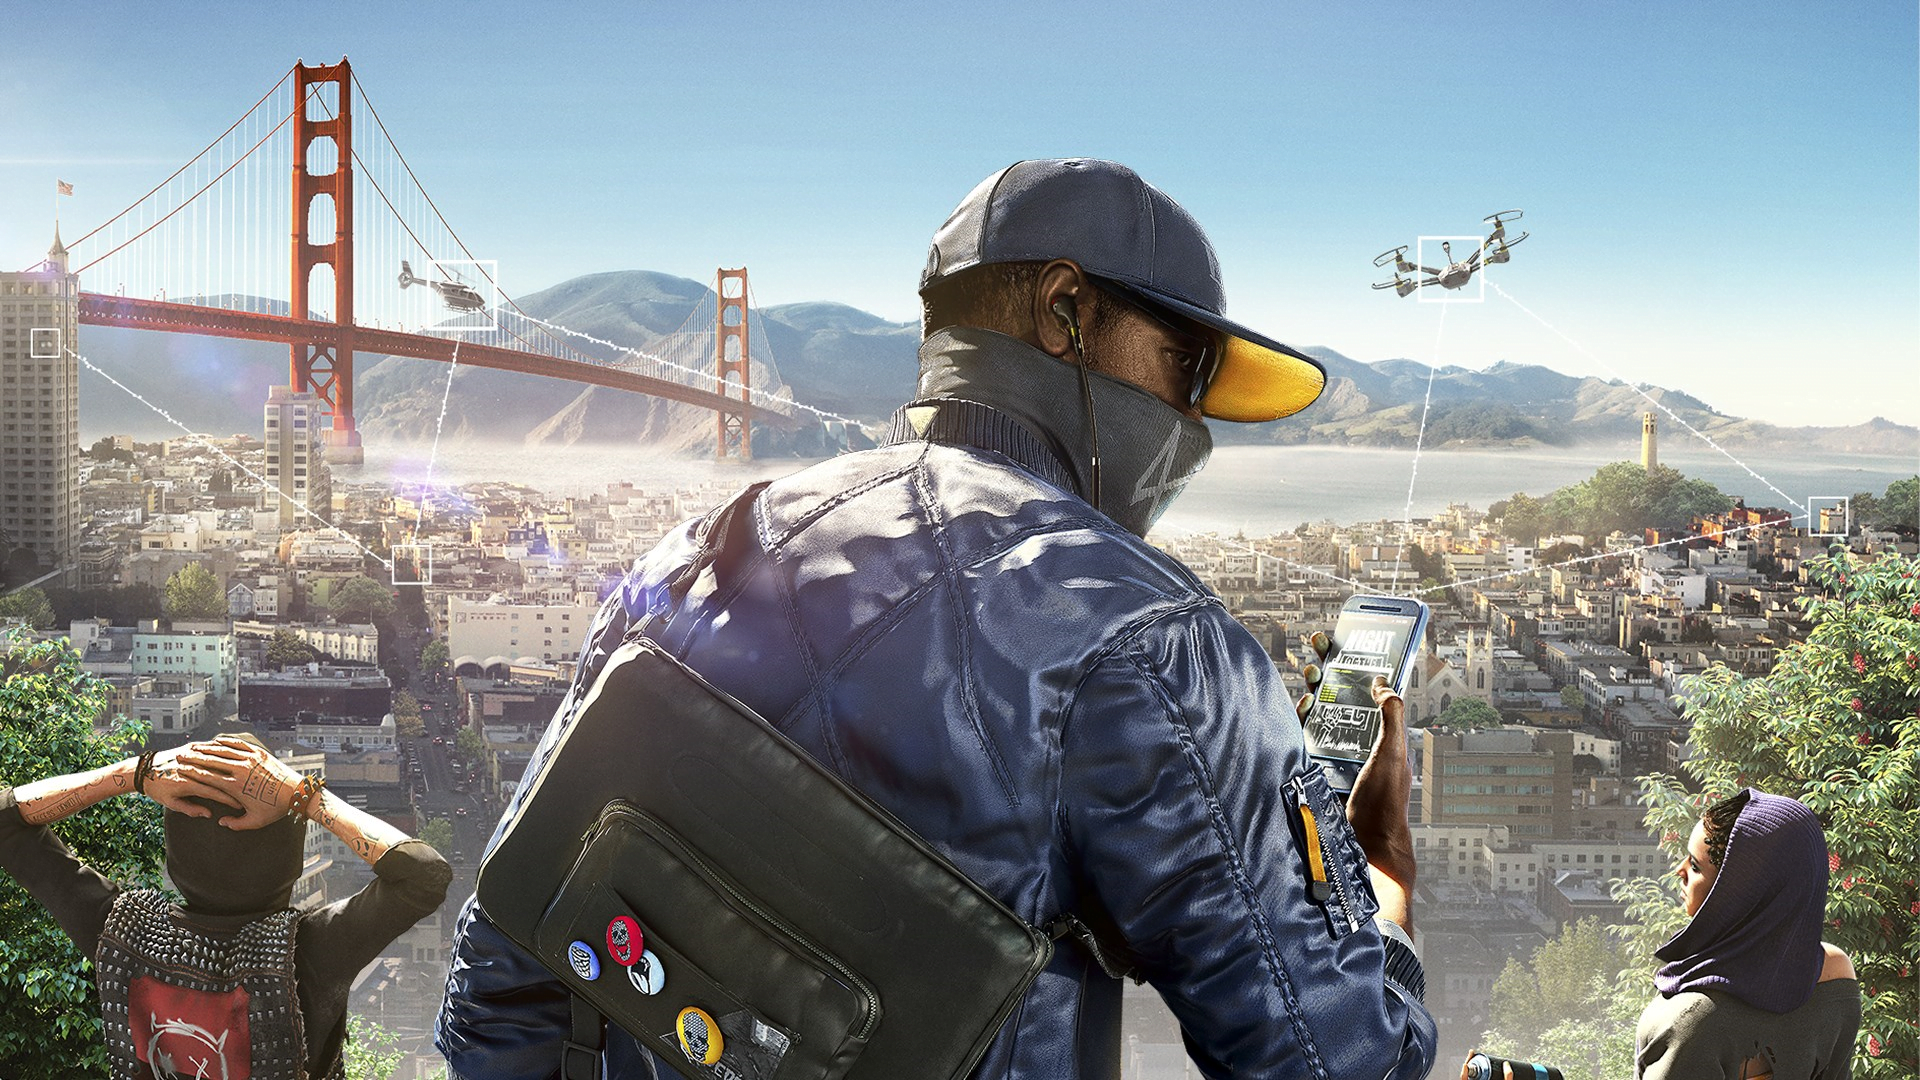 download watch dogs 2 demo pc free